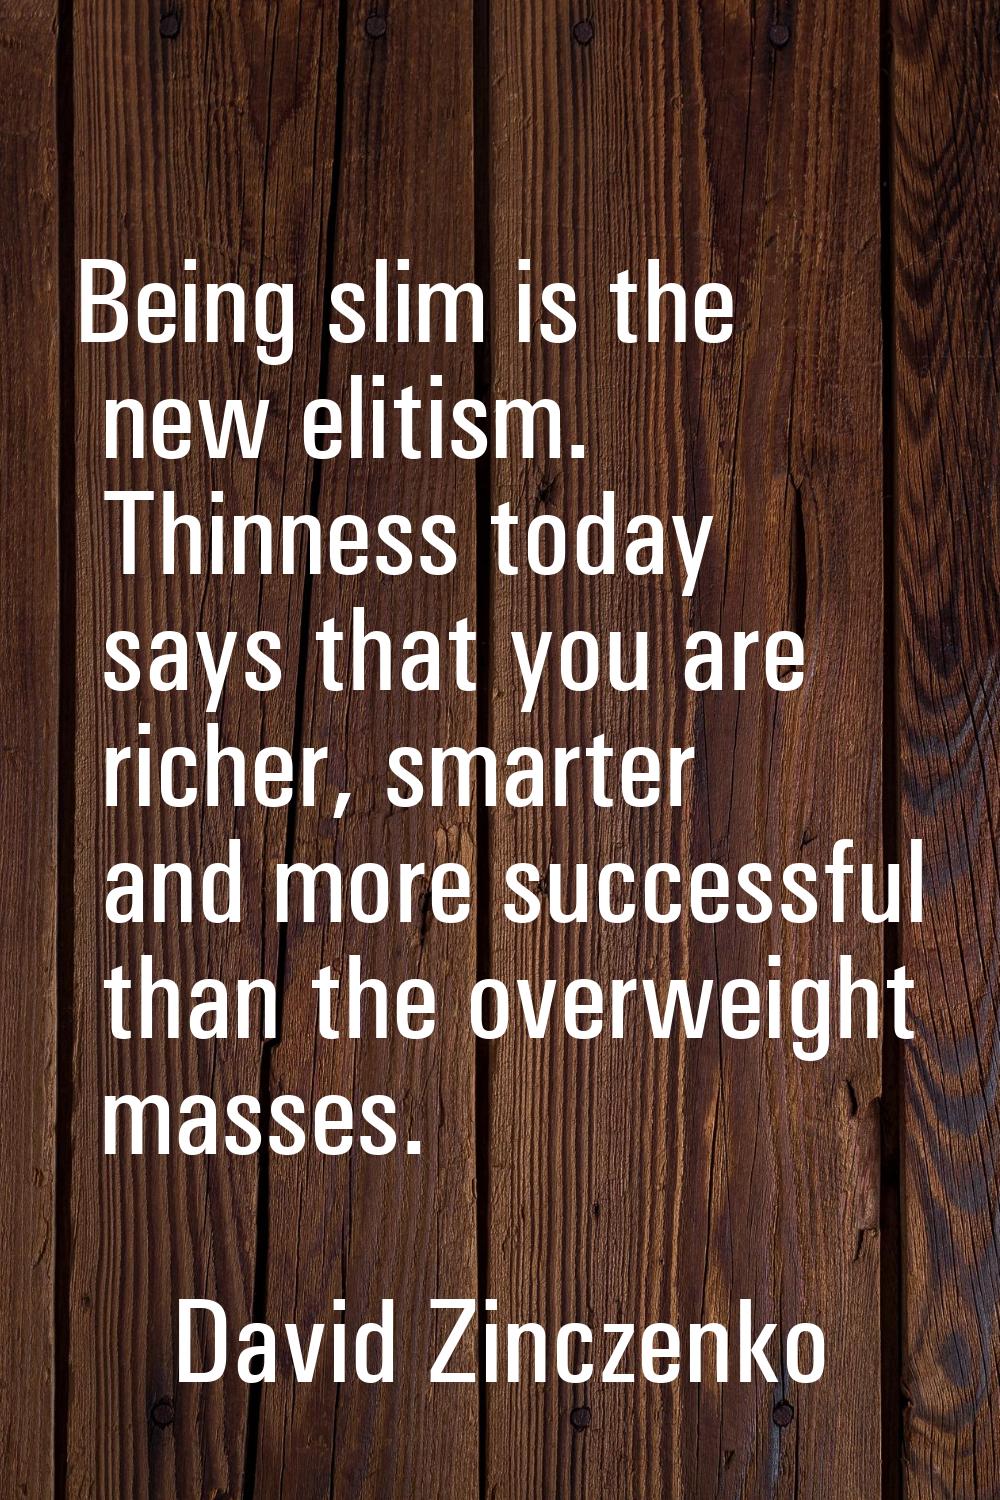 Being slim is the new elitism. Thinness today says that you are richer, smarter and more successful